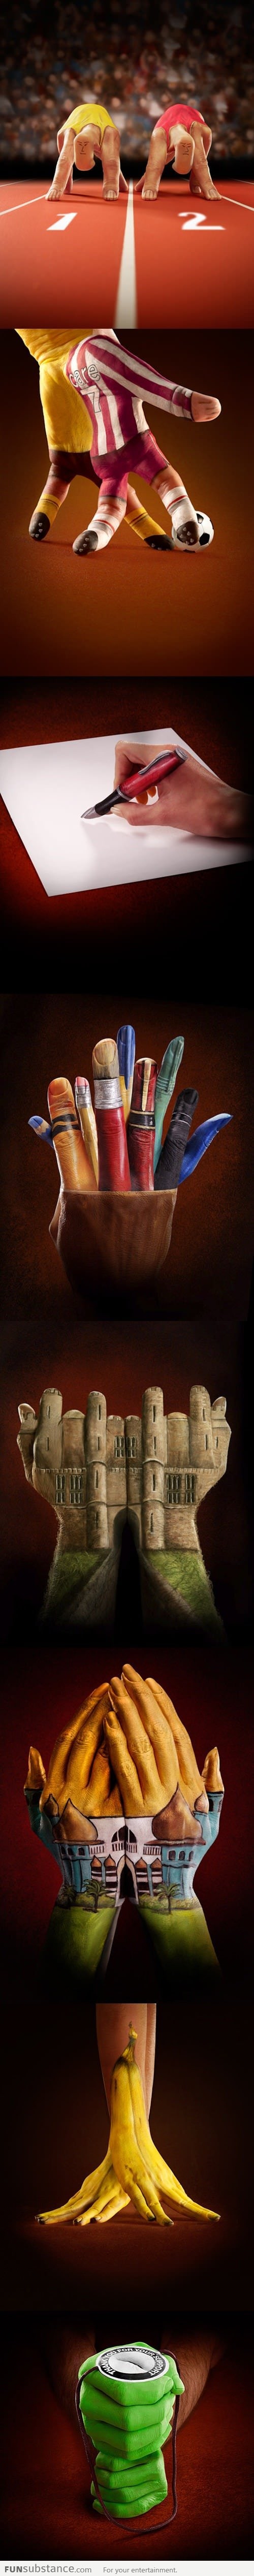 Awesome Hand Paintings by Ray Massey